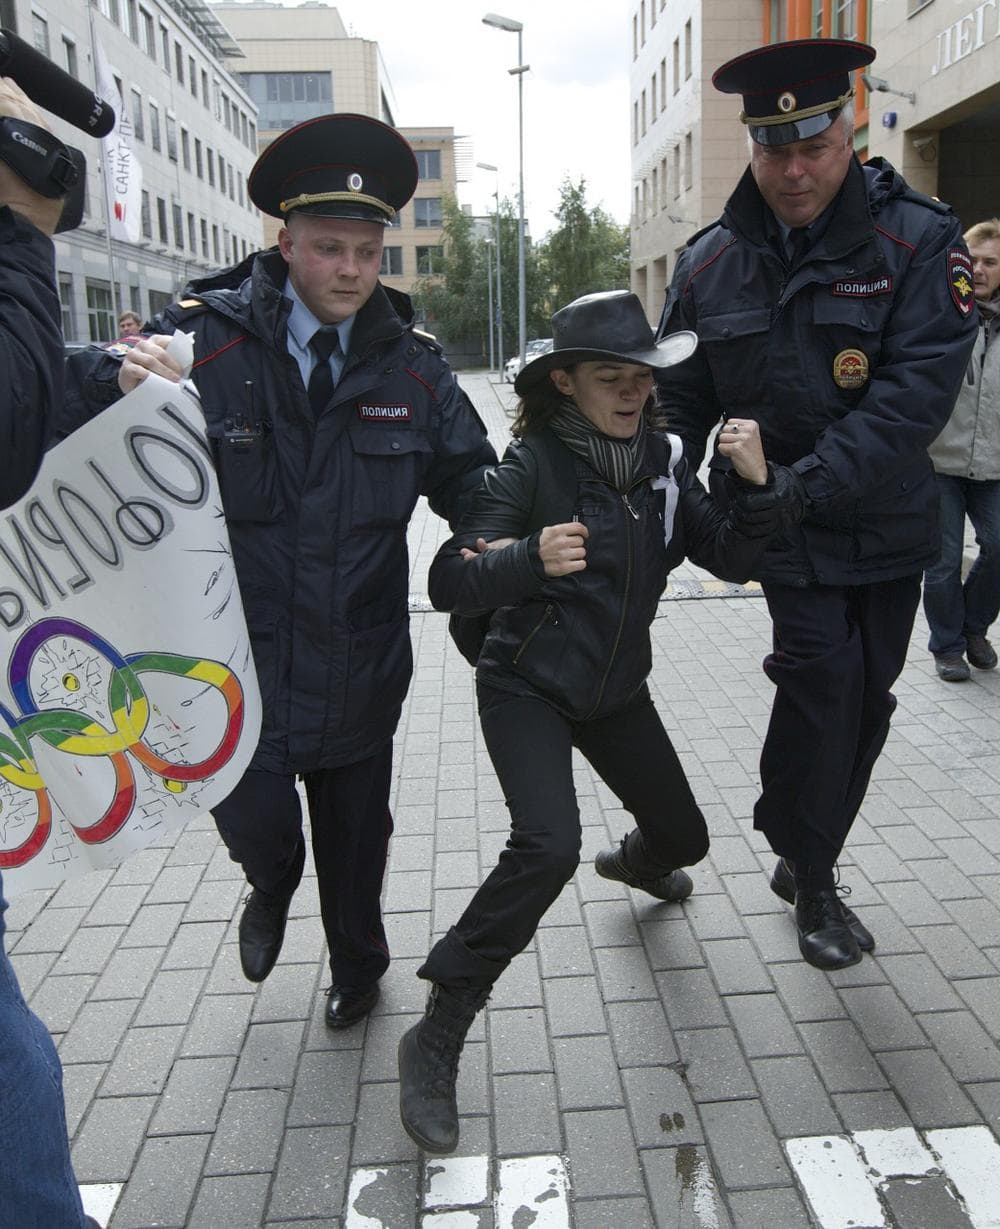 Russian police officers detain a gay rights activist during a protest outside the Sochi 2014 Winter Olympic Games organizing committee office, in Moscow, Russia, on Wednesday, Sept. 25, 2013.  (Ivan Sekretarev/AP)